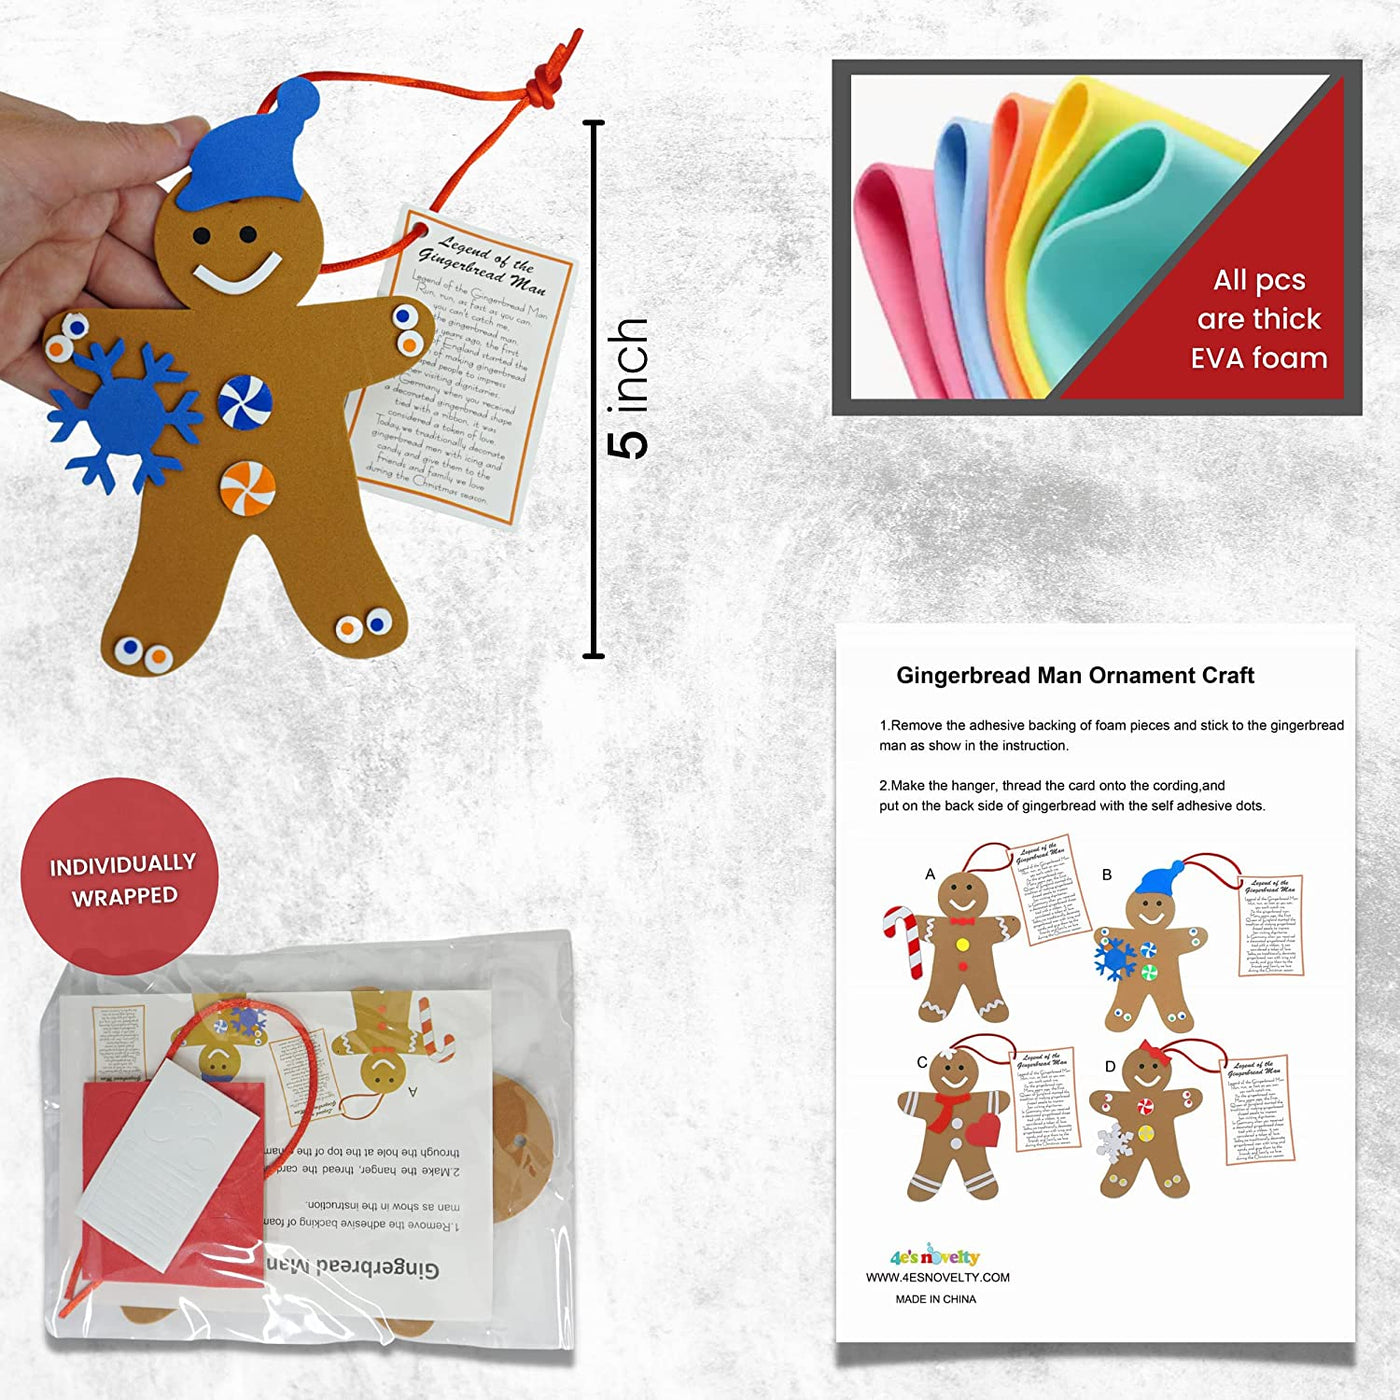 4E's Novelty Legend of Gingerbread Man Ornament Kids Craft (12 Pack) Bulk Foam Christmas Crafts for Kids Toddlers 2-4 4-8 Self Adhesive DIY Arts and Craft Kit